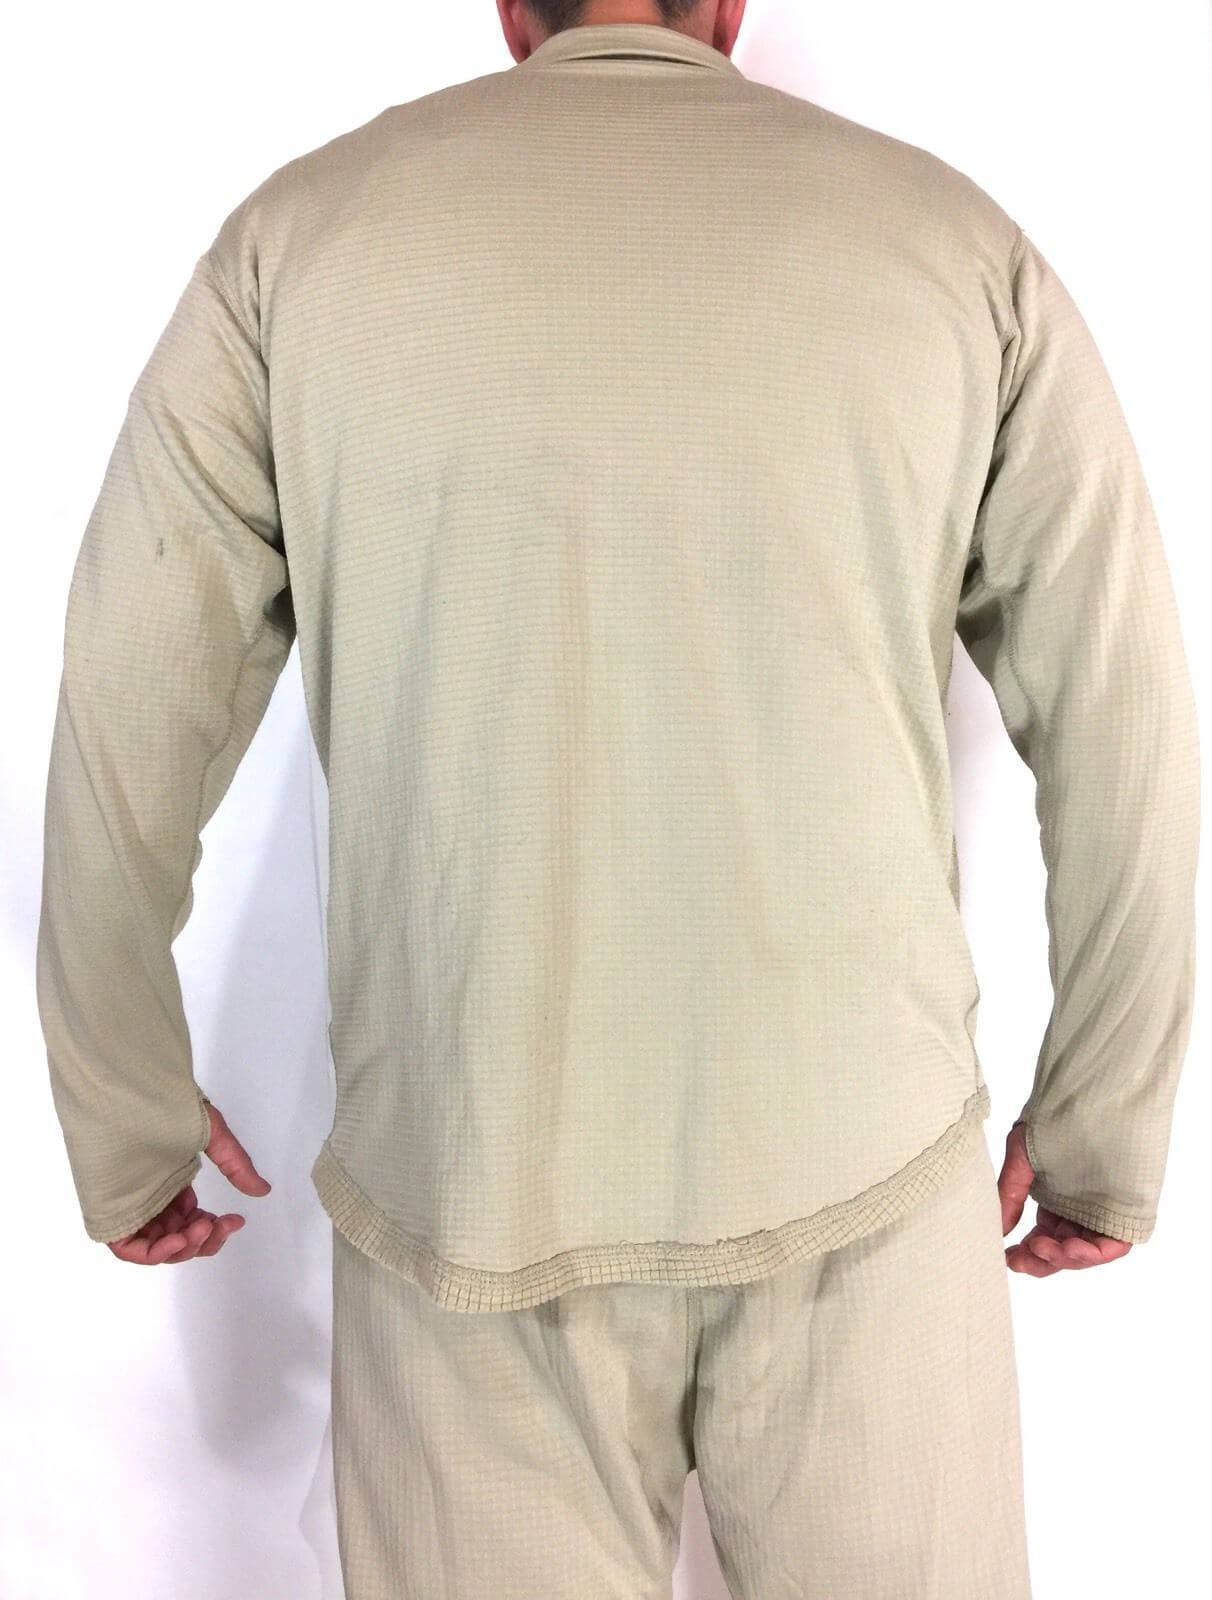 Military Thermal Undershirt, ECWCS LEVEL 2 Mid Weight Shirt (Waffle Top)